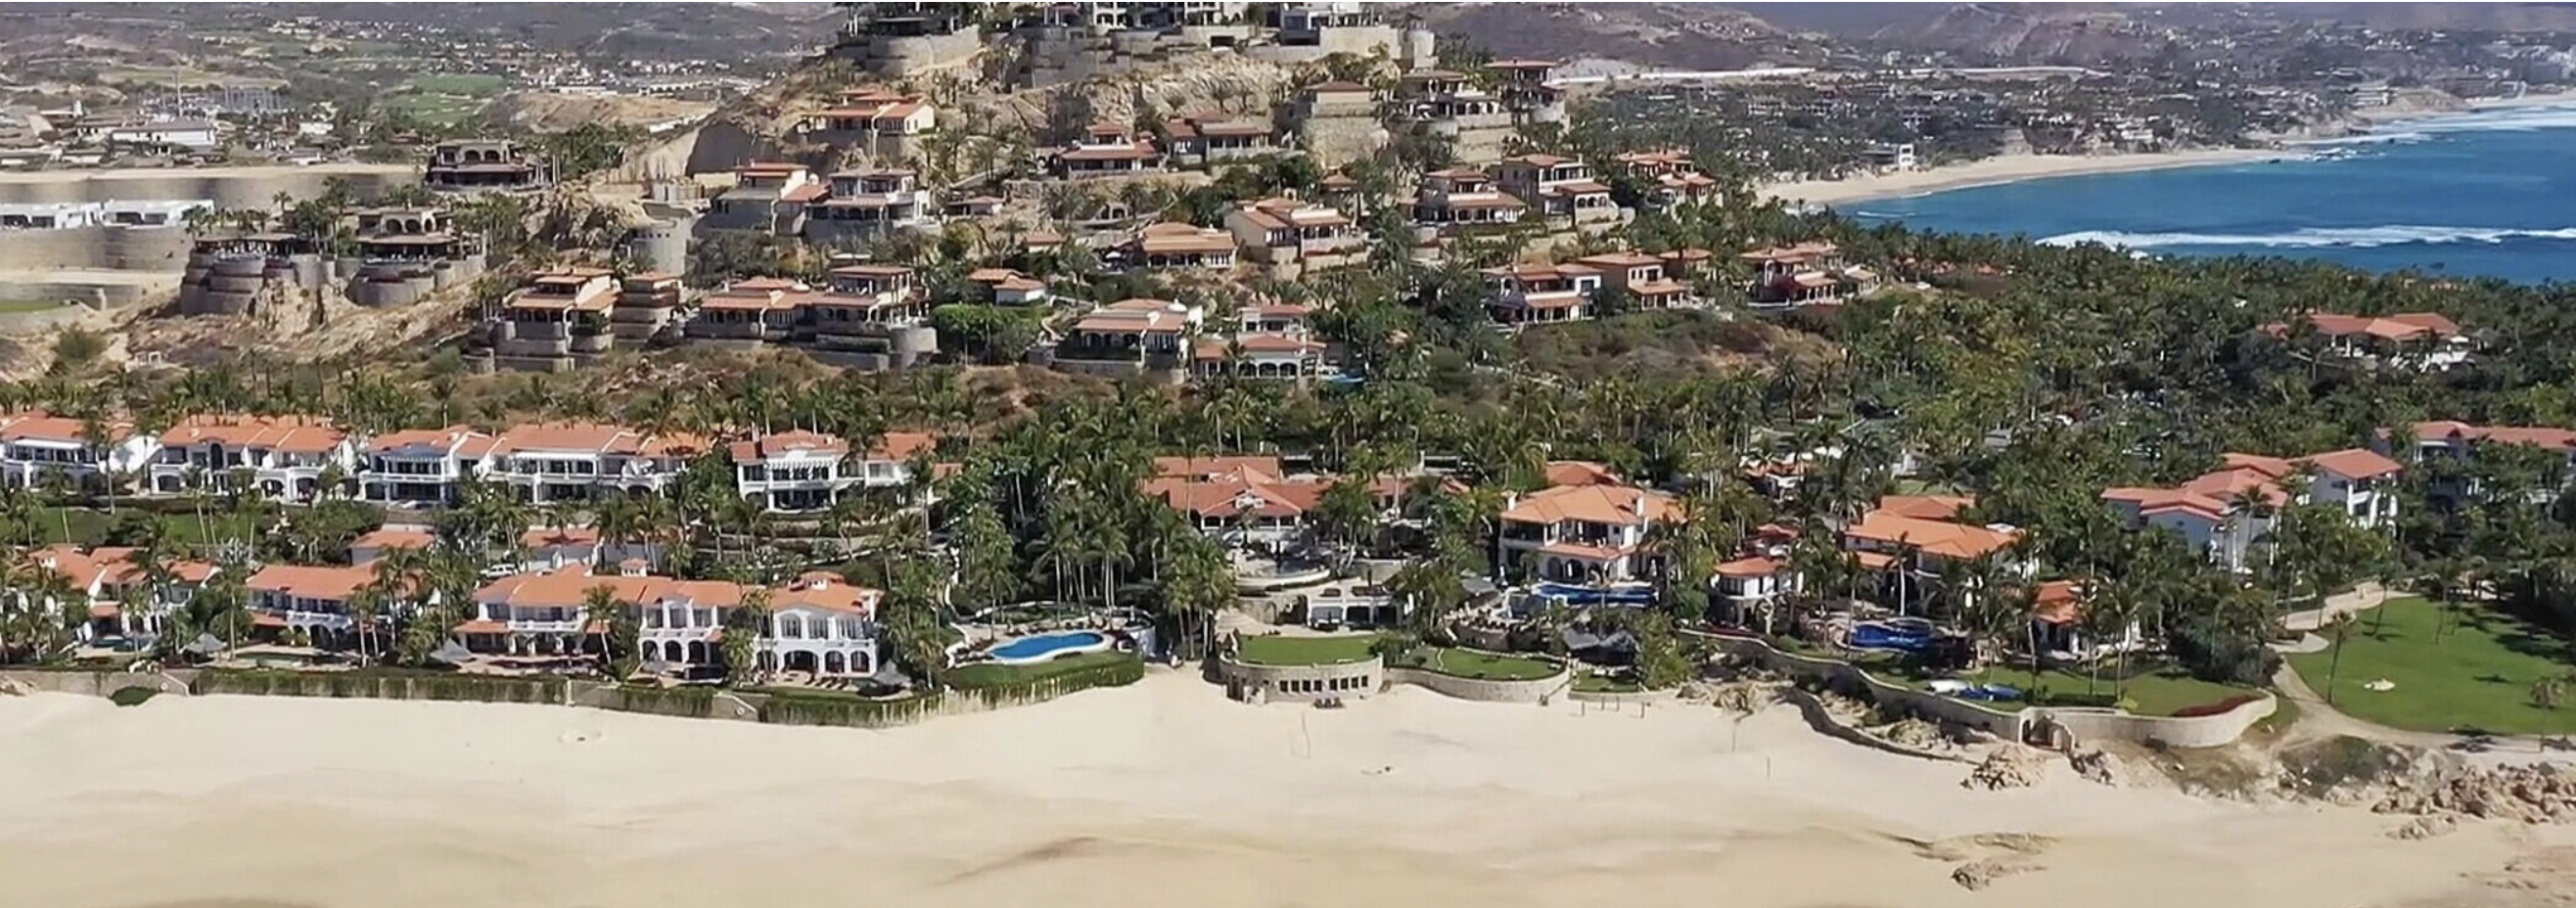 What Makes Villas Del Mar The Most Unique Community to Rent/Buy Right Now -  Lifestyle in Cabo